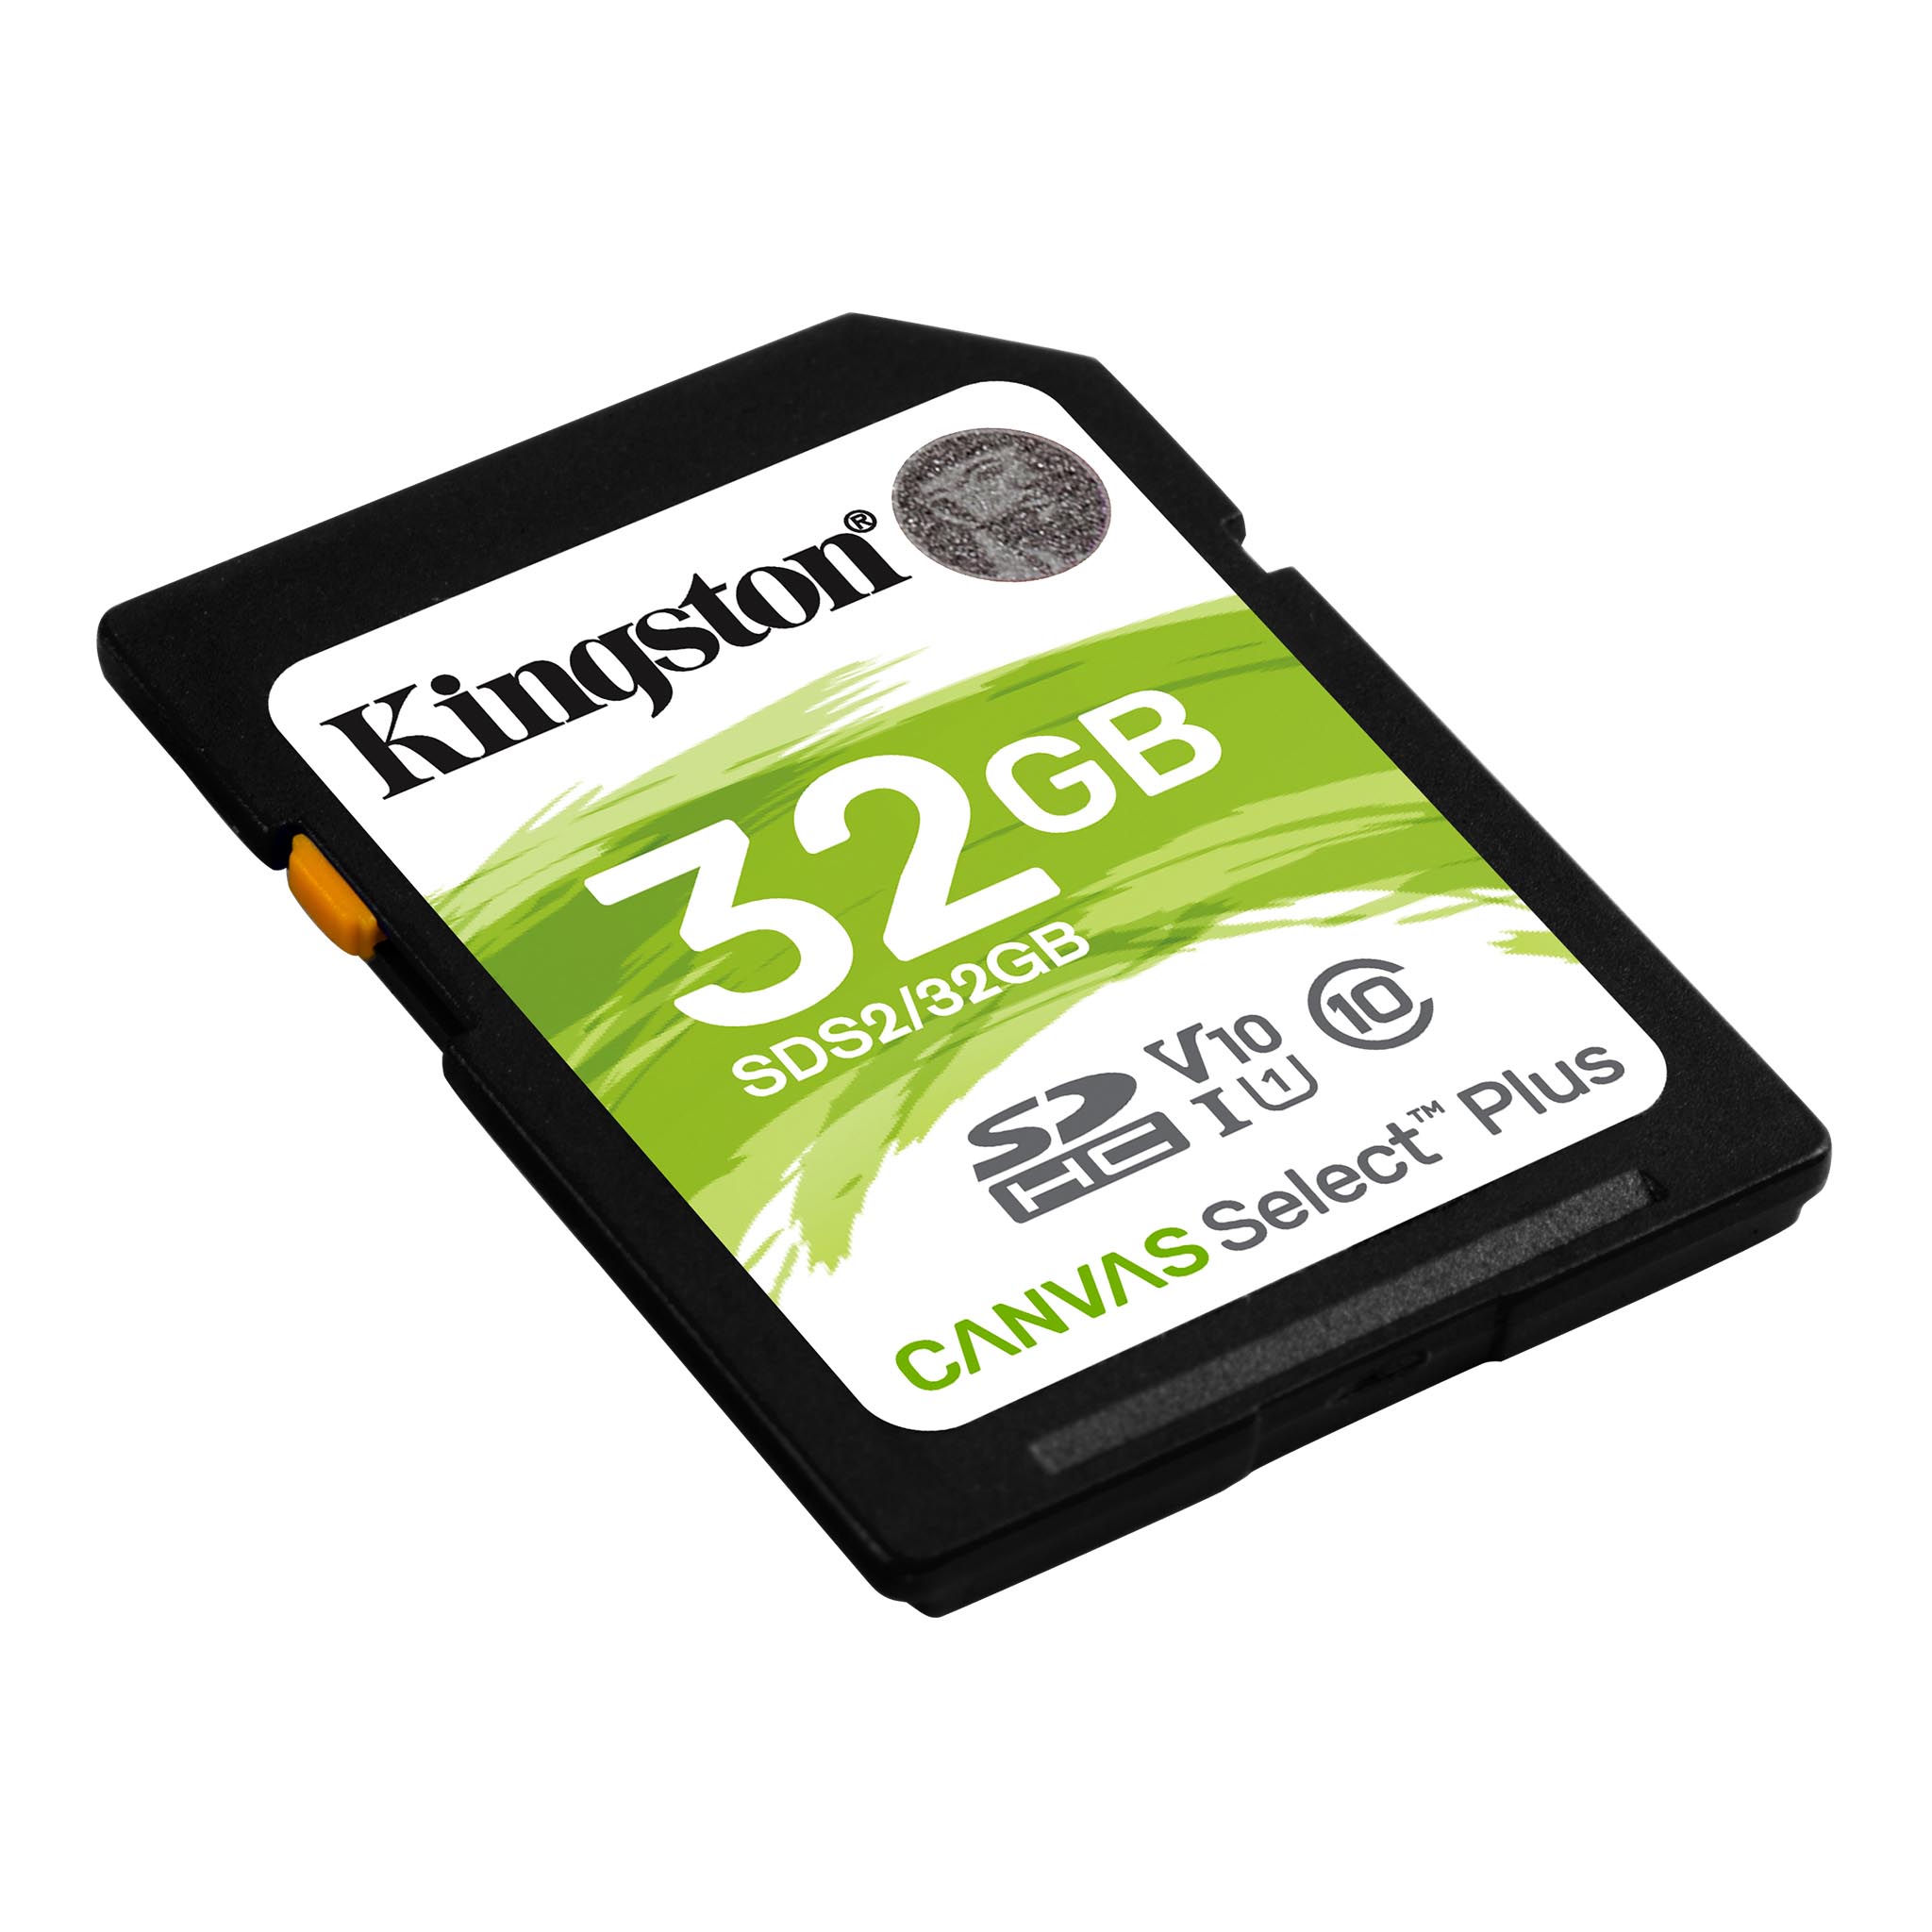 SDS2//32GB Class 10 UHS-I Kingston Canvas Select Plus SD